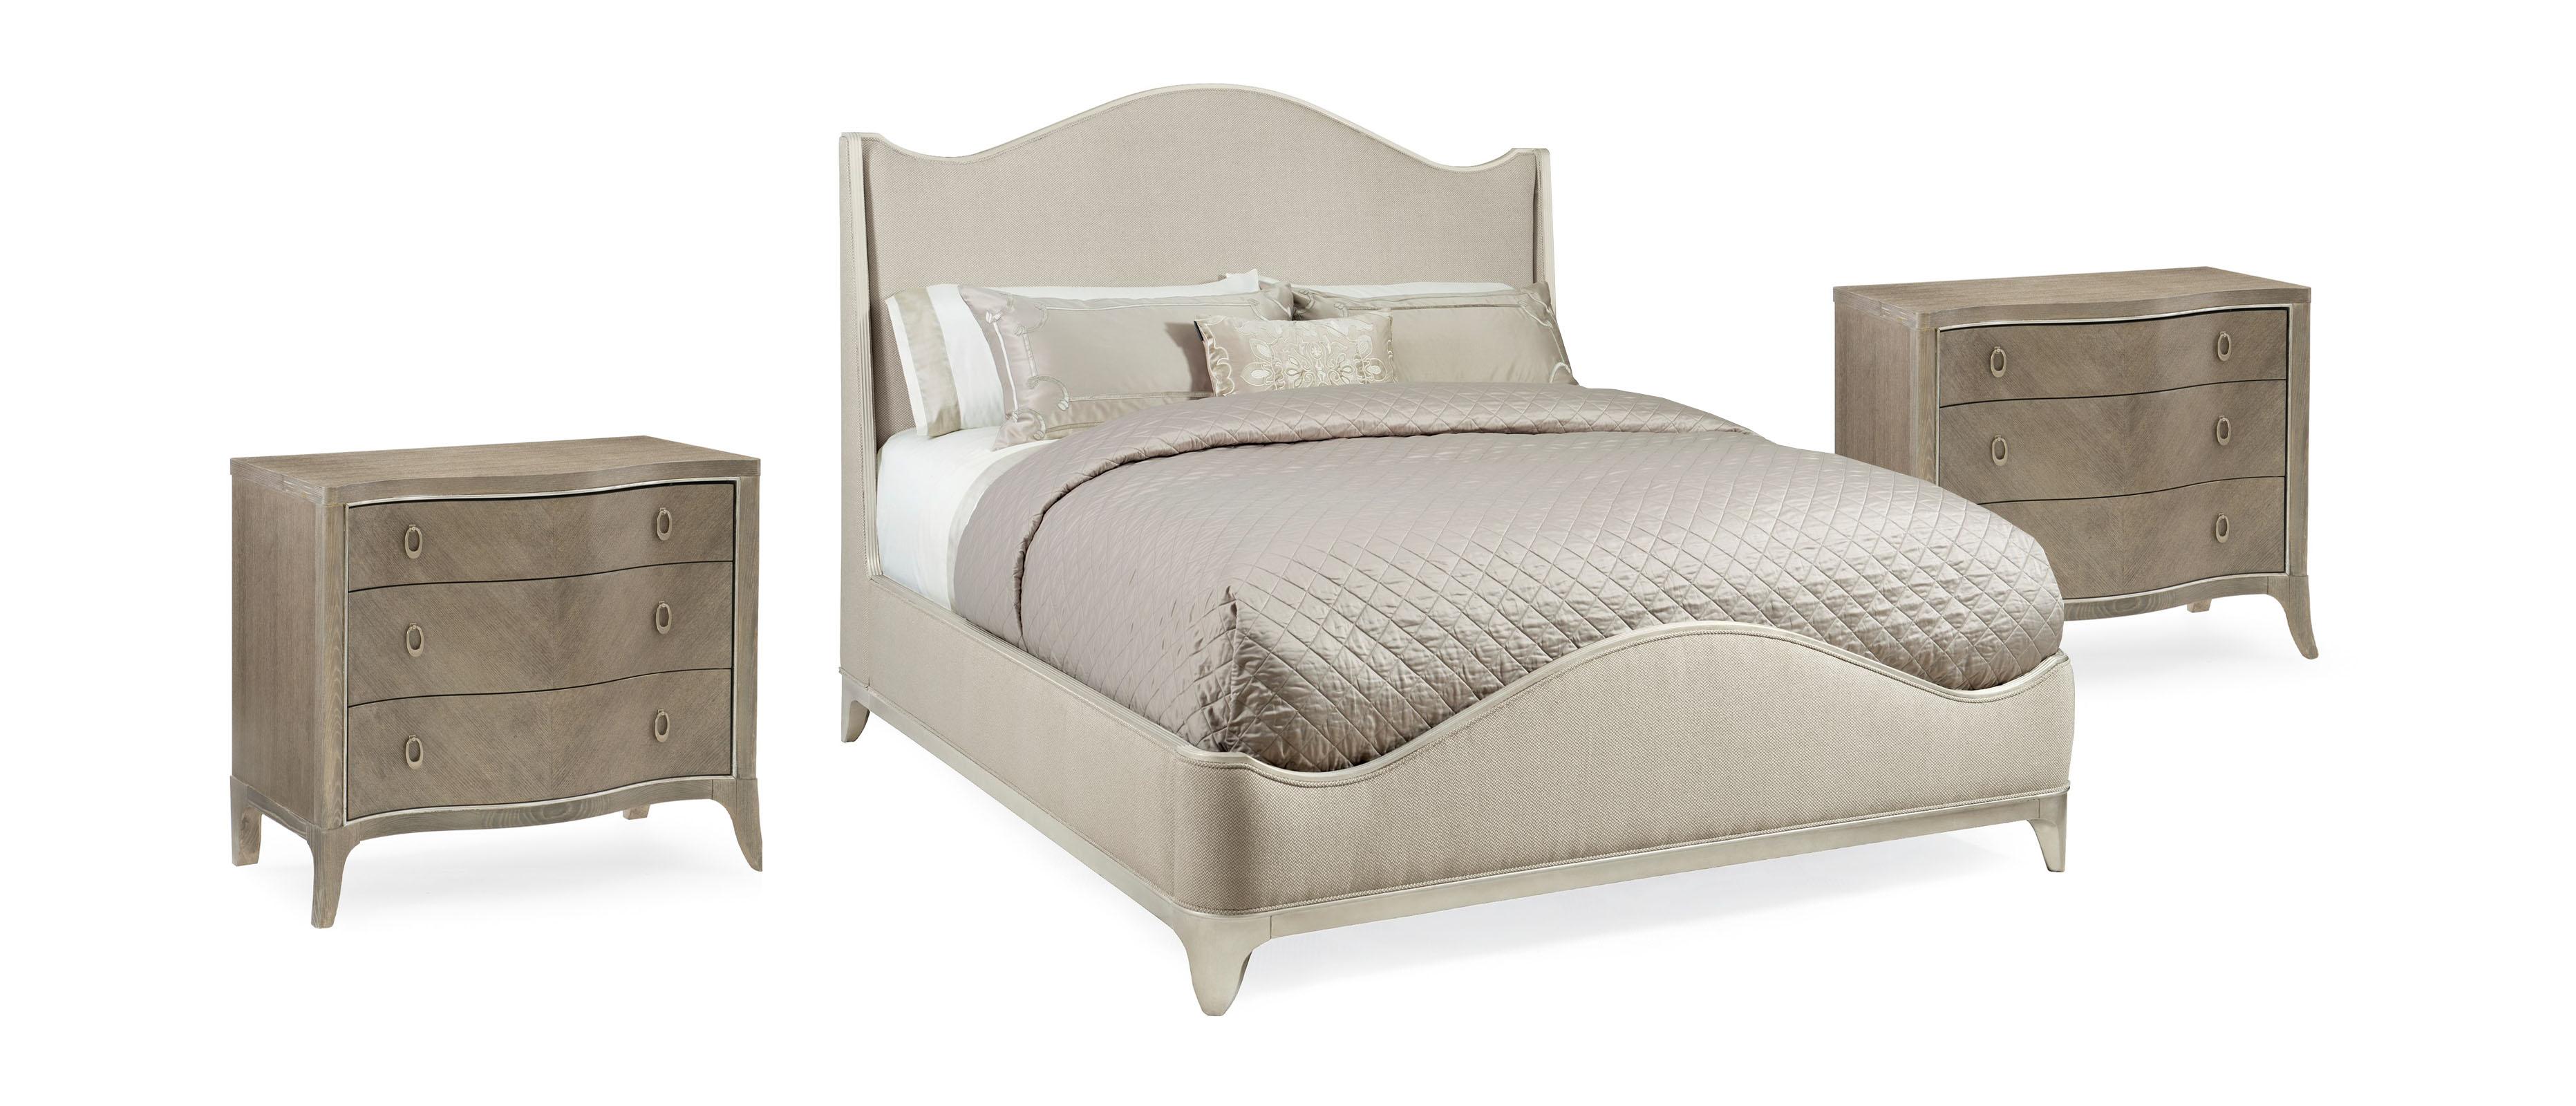 Contemporary Sleigh Bedroom Set AVONDALE KING UPHOLSTERED BED / AVONDALE NIGHTSTAND C023-417-121-Set-3 in Cream, Silver Fabric